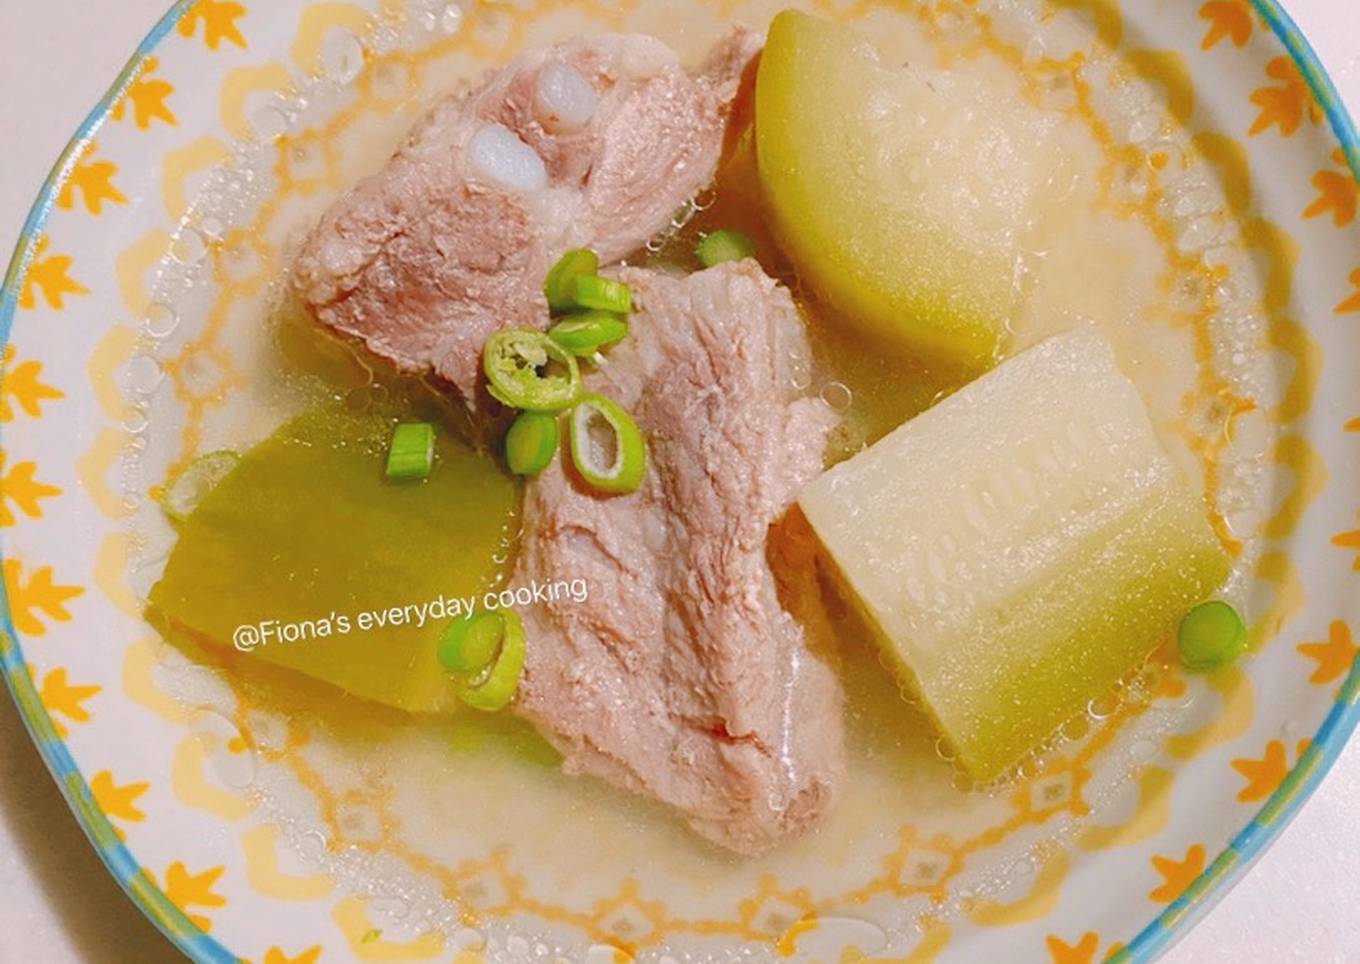 Pork ribs soup with white gourd 清爽冬瓜排骨汤